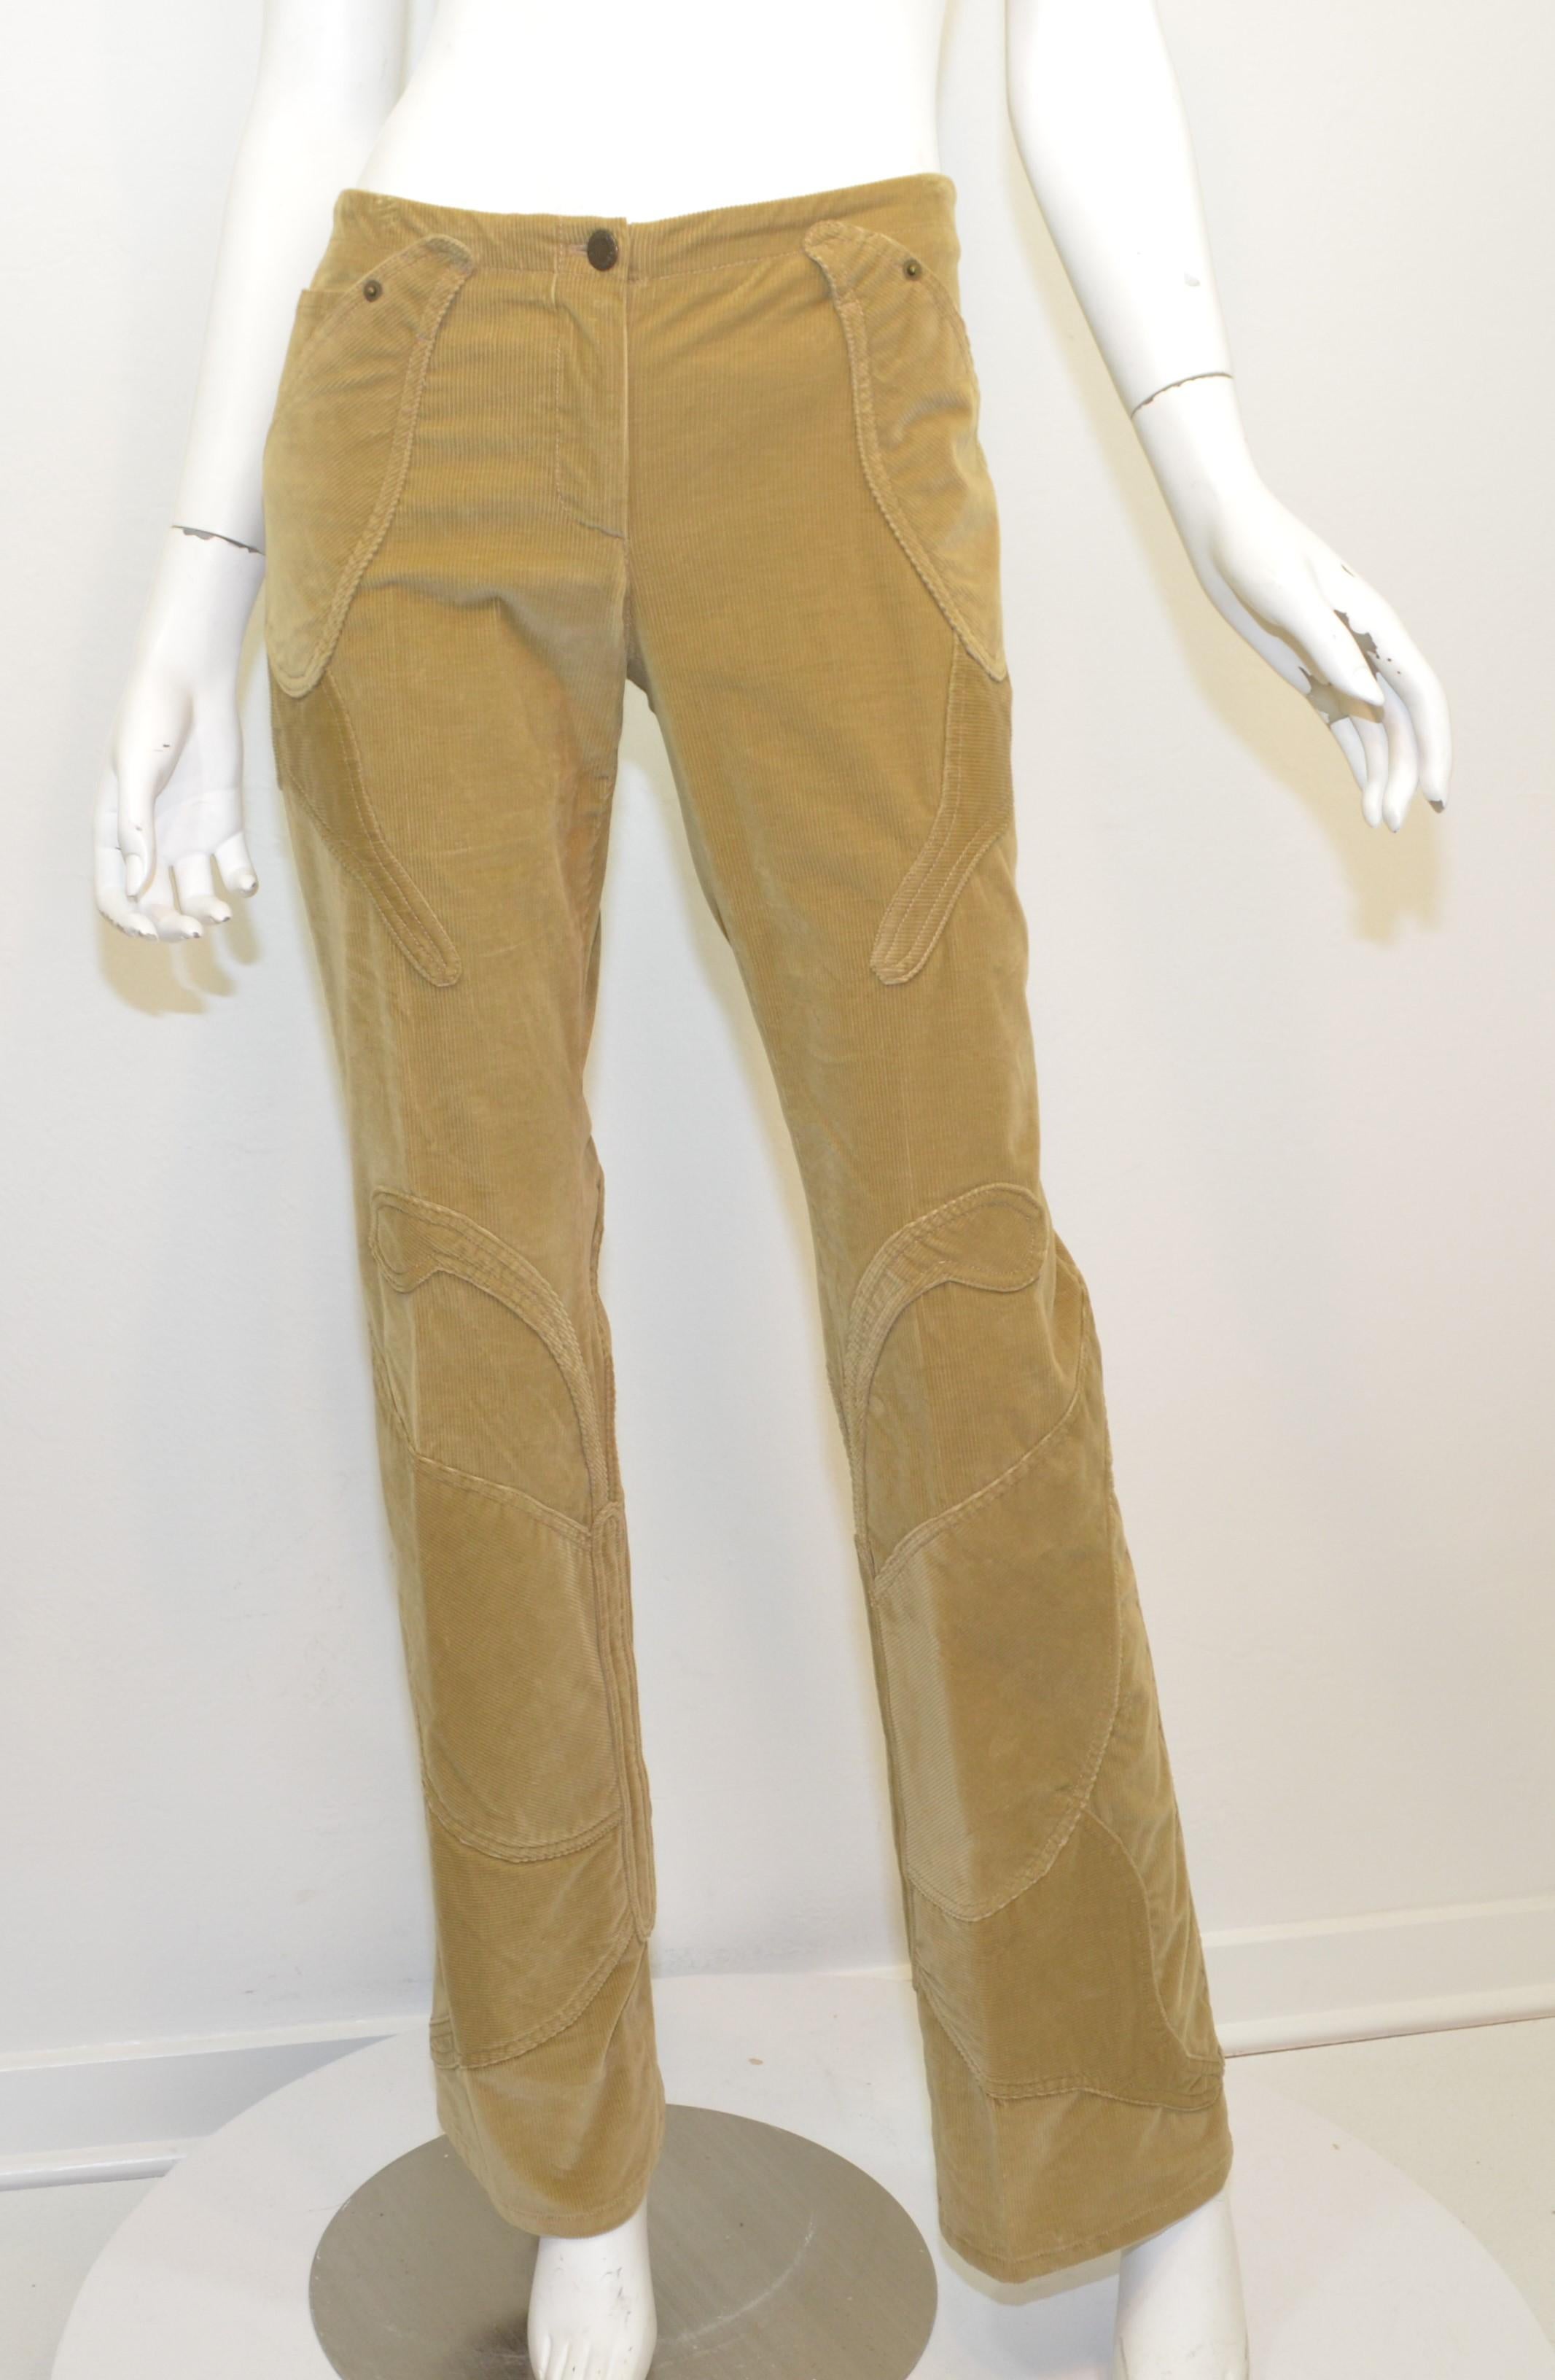 Dolce & Gabbana Velvet Corduroy Pants featured in a camel/tan color with a butterfly design along the pant legs and functional front pockets. Pants have a zipper and button fastening. Labeled size 42, made in Italy 

Measurements:
Waist 32”
Hips